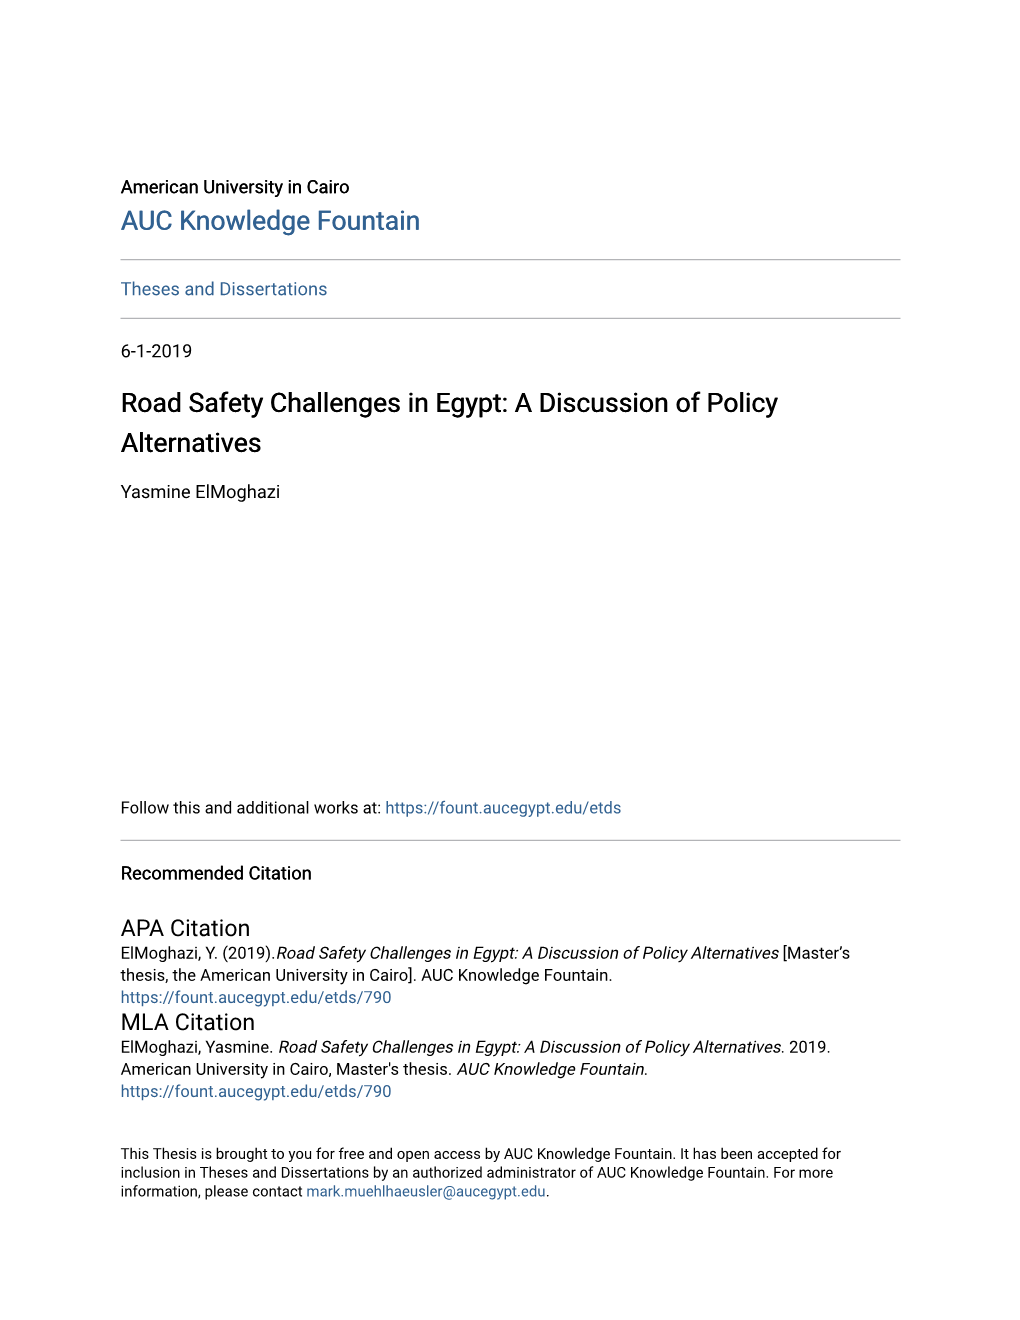 Road Safety Challenges in Egypt: a Discussion of Policy Alternatives